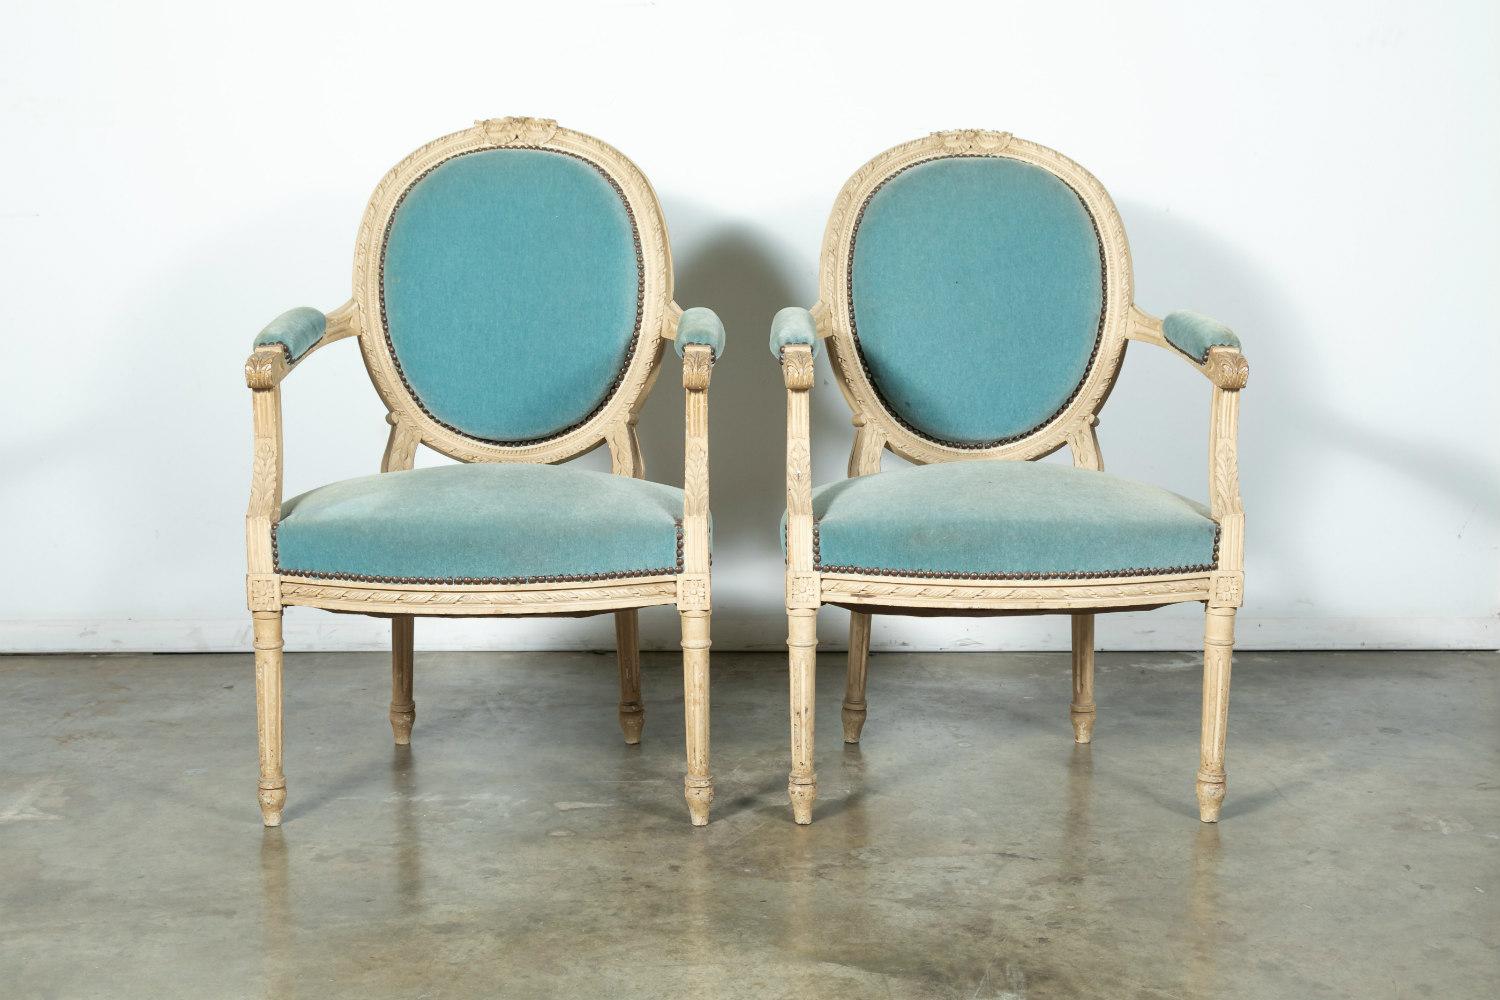 Lovely pair of Louis XVI style armchairs having medallion backs with ribbon motif and acanthus carved armrests in original cream paint with blue velvet upholstery and nailhead trim, circa 1900s. Very sturdy chairs with large seat.

Dimensions: